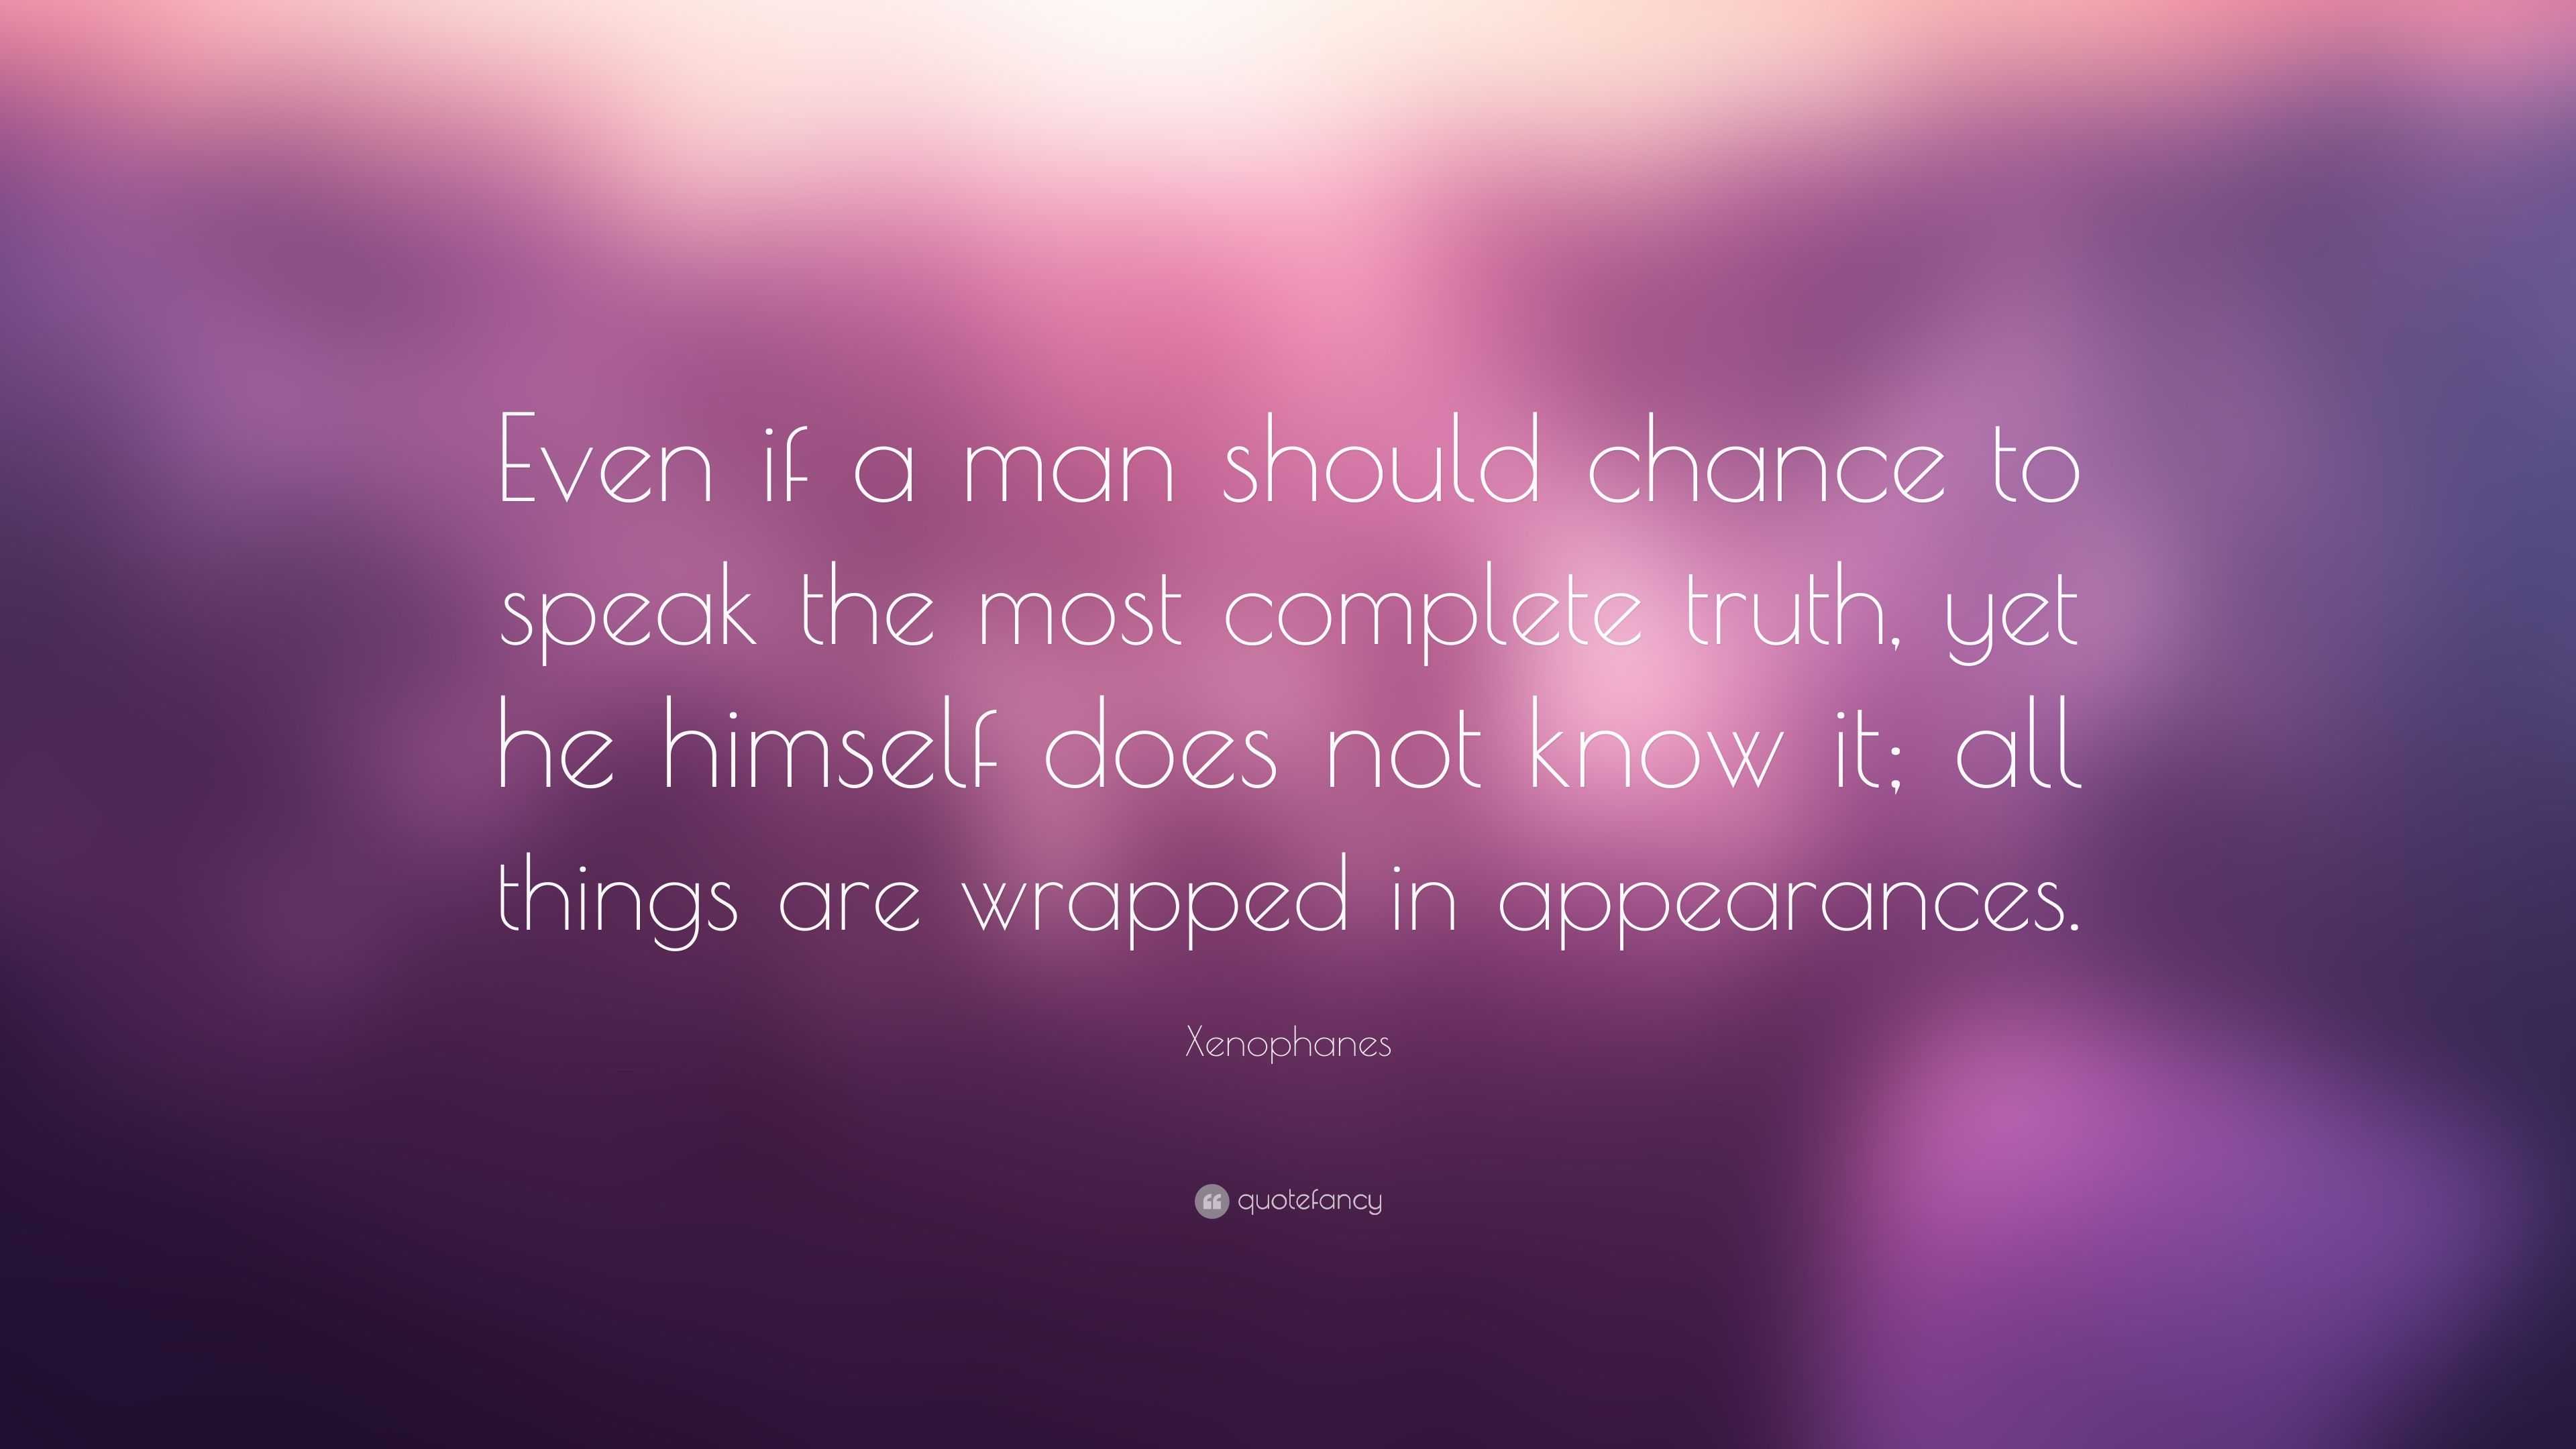 Xenophanes Quote: “Even if a man should chance to speak the most